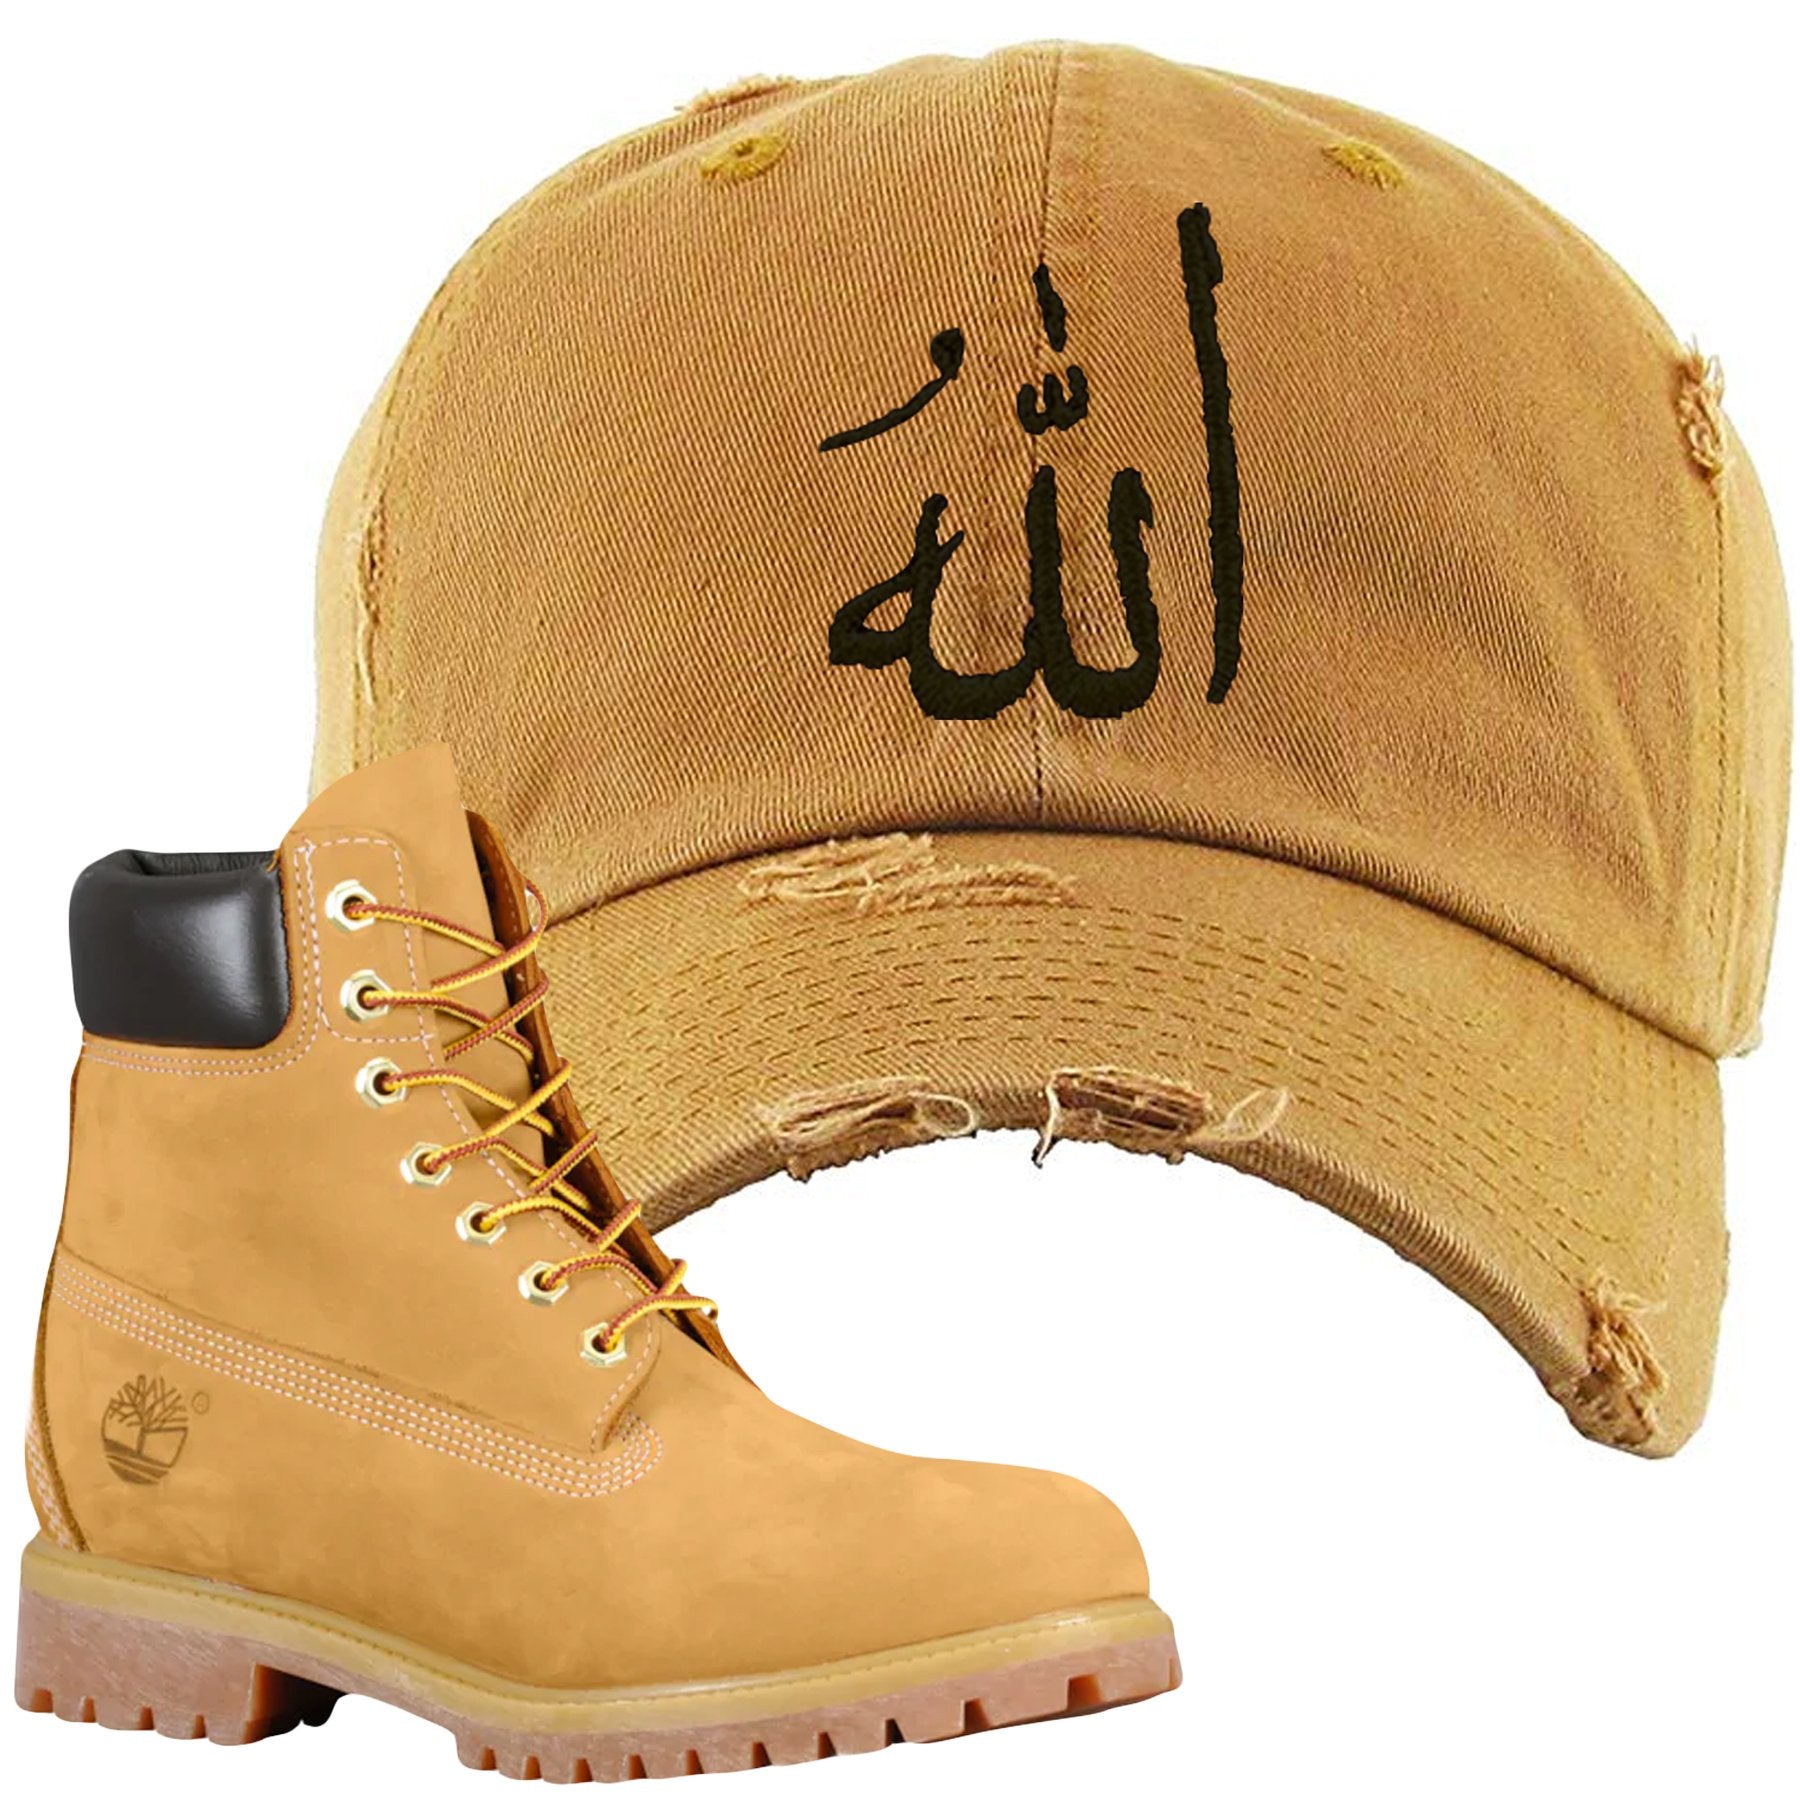 Embroidered on the front of the Timberland Wheat Timbs Boot Matching Dad Hat is a matching Timberland Wheat Timbs inspired logo